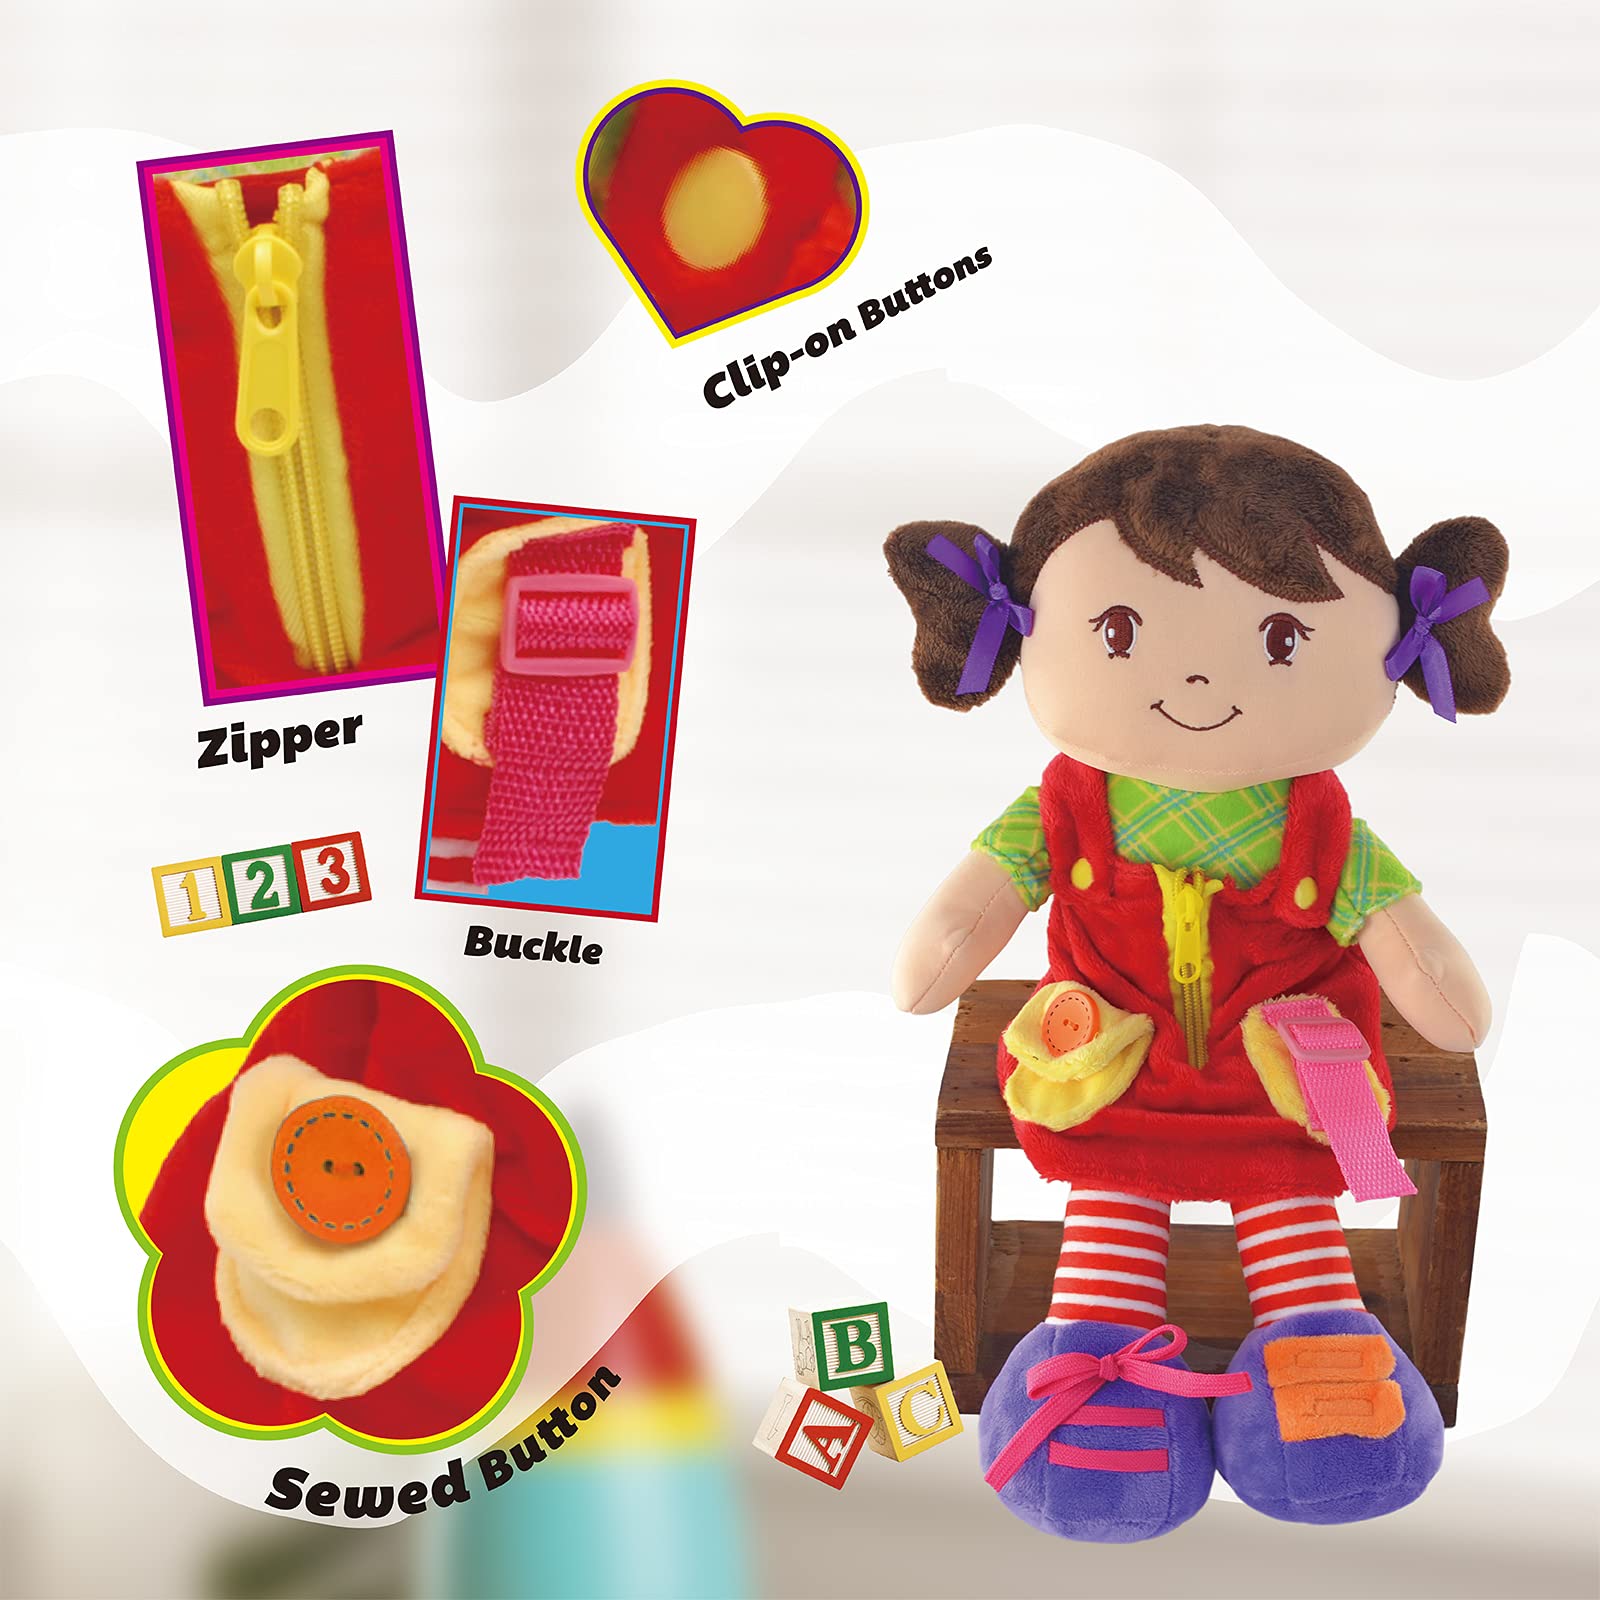 Linzy Plush 16" Educational Plush Doll, Adorable Plush Doll Comes with clad ,a Removable Outfit Packed with Closures-Perfect for Testing a Little One's Growing Problem Solving and Motor Skills